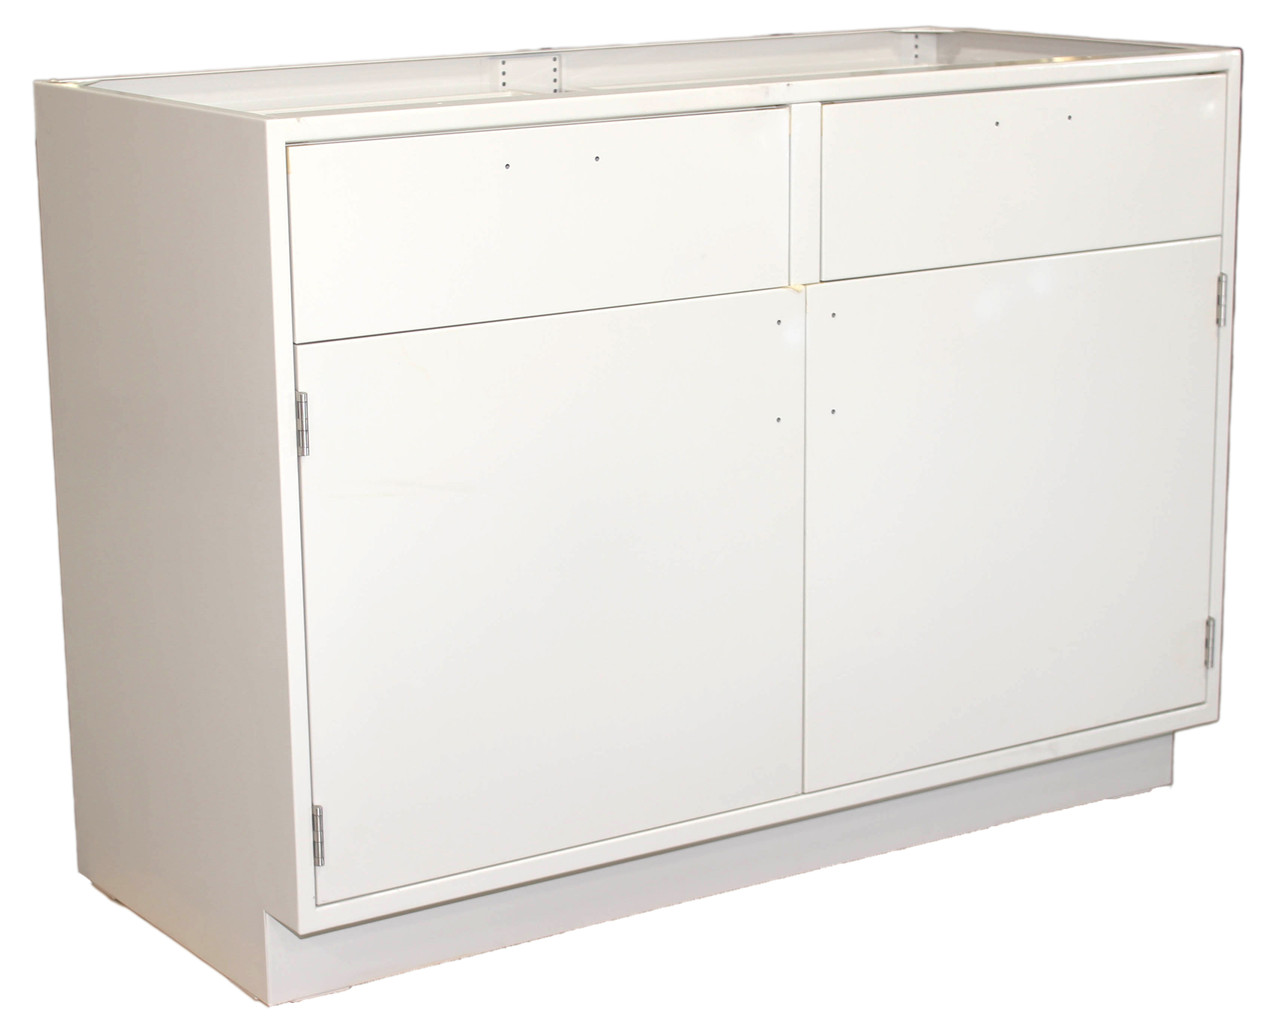 ICI Quick Ship CPJTP103-48 Standing Height Base Cabinet 2 Door/2 Draw, 48 Inches Wide x 35-1/4 Inches Tall x 21-5/8 Inches Deep, 7-1/2 Inches Draw, ICI Number: 257S8320.